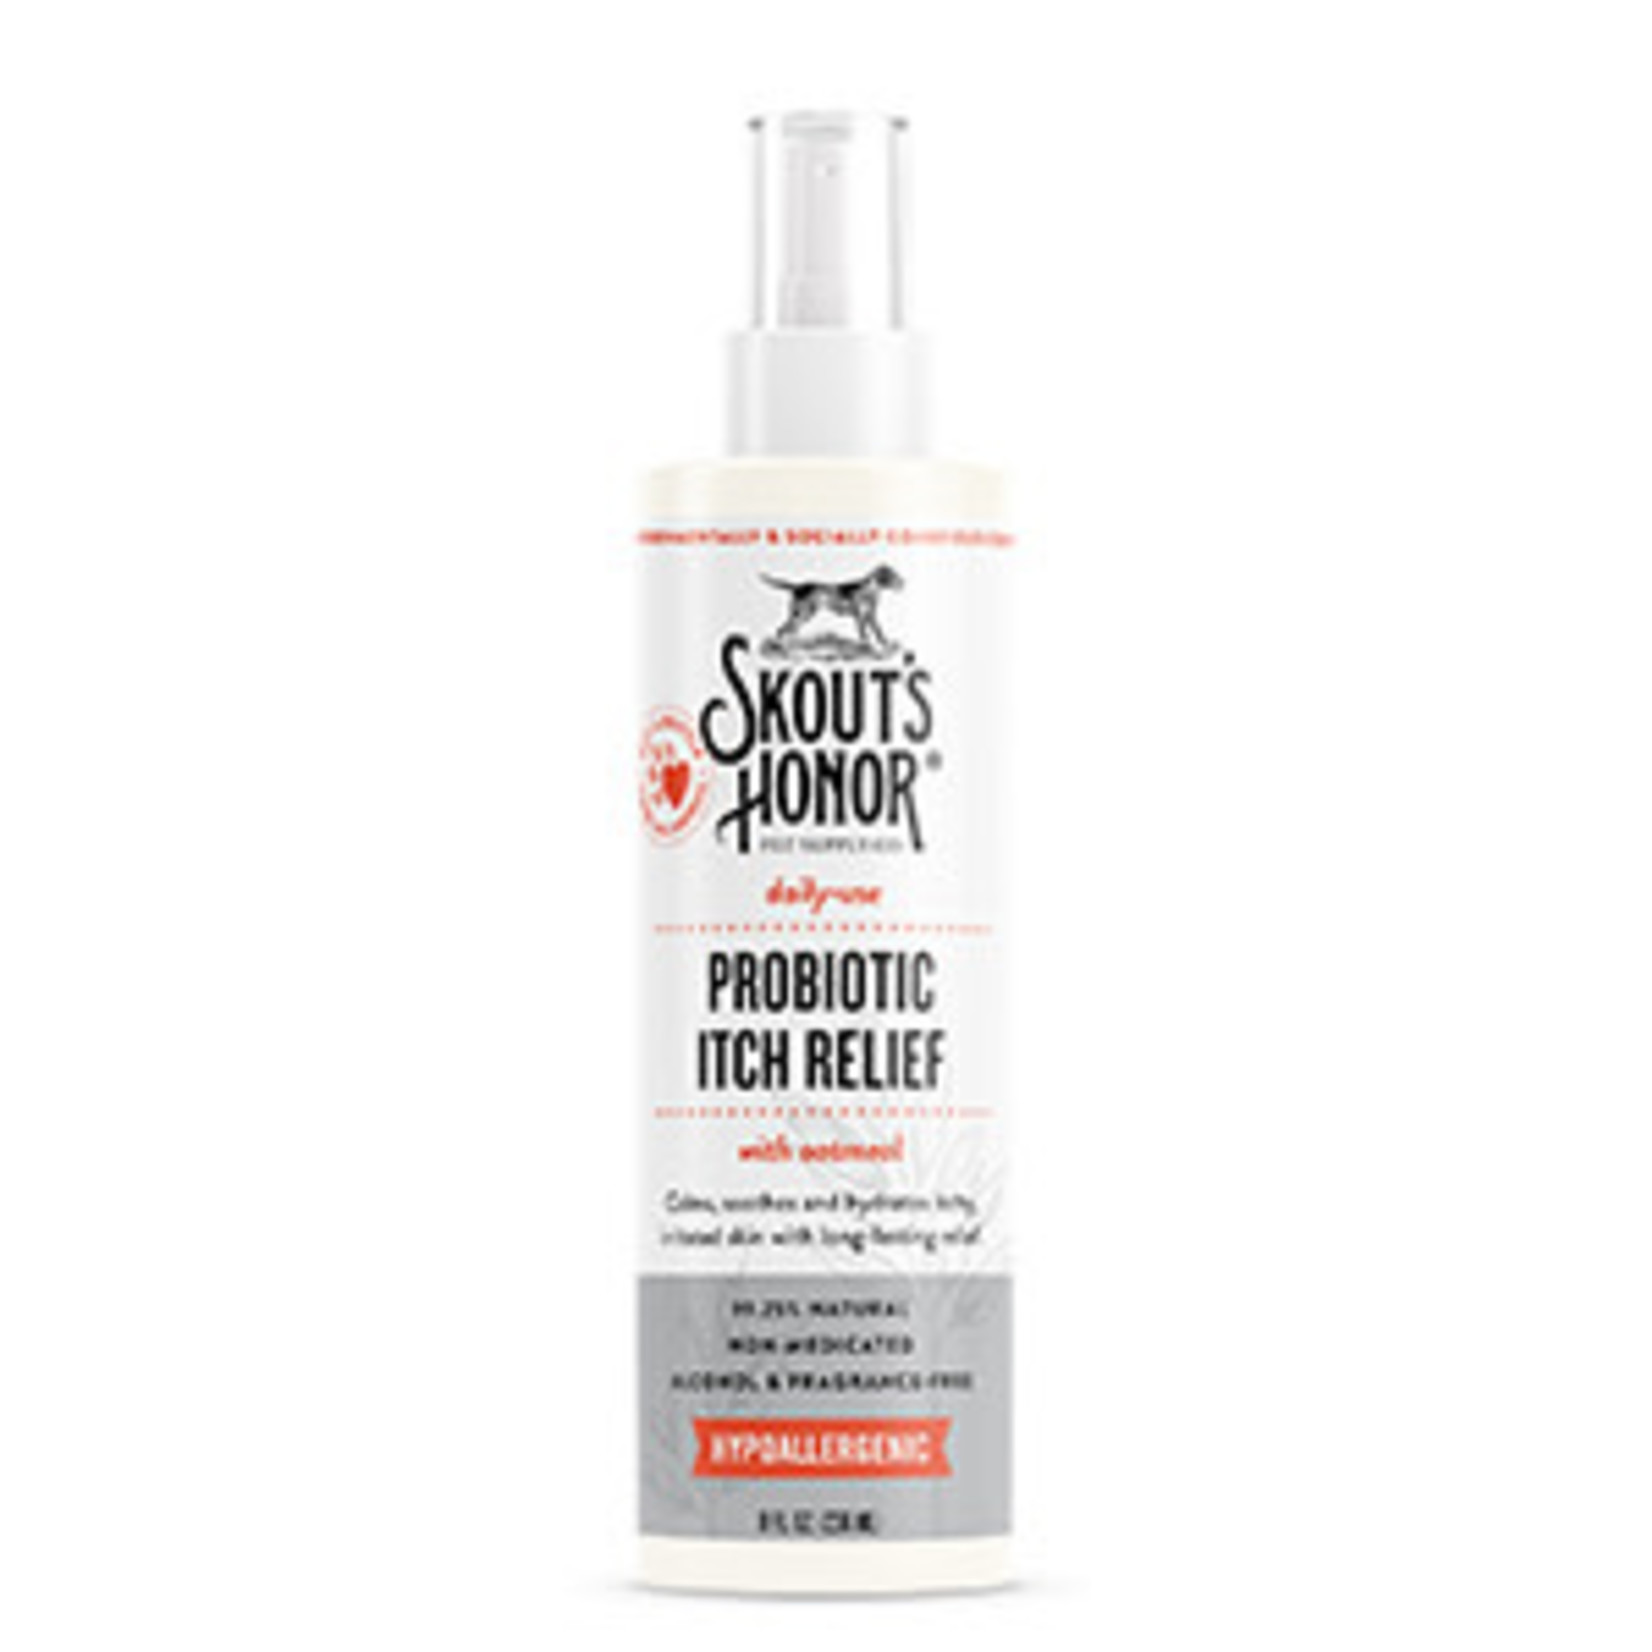 Skouts Honor Skouts Honor Probiotic Itch Relief 8 OZ